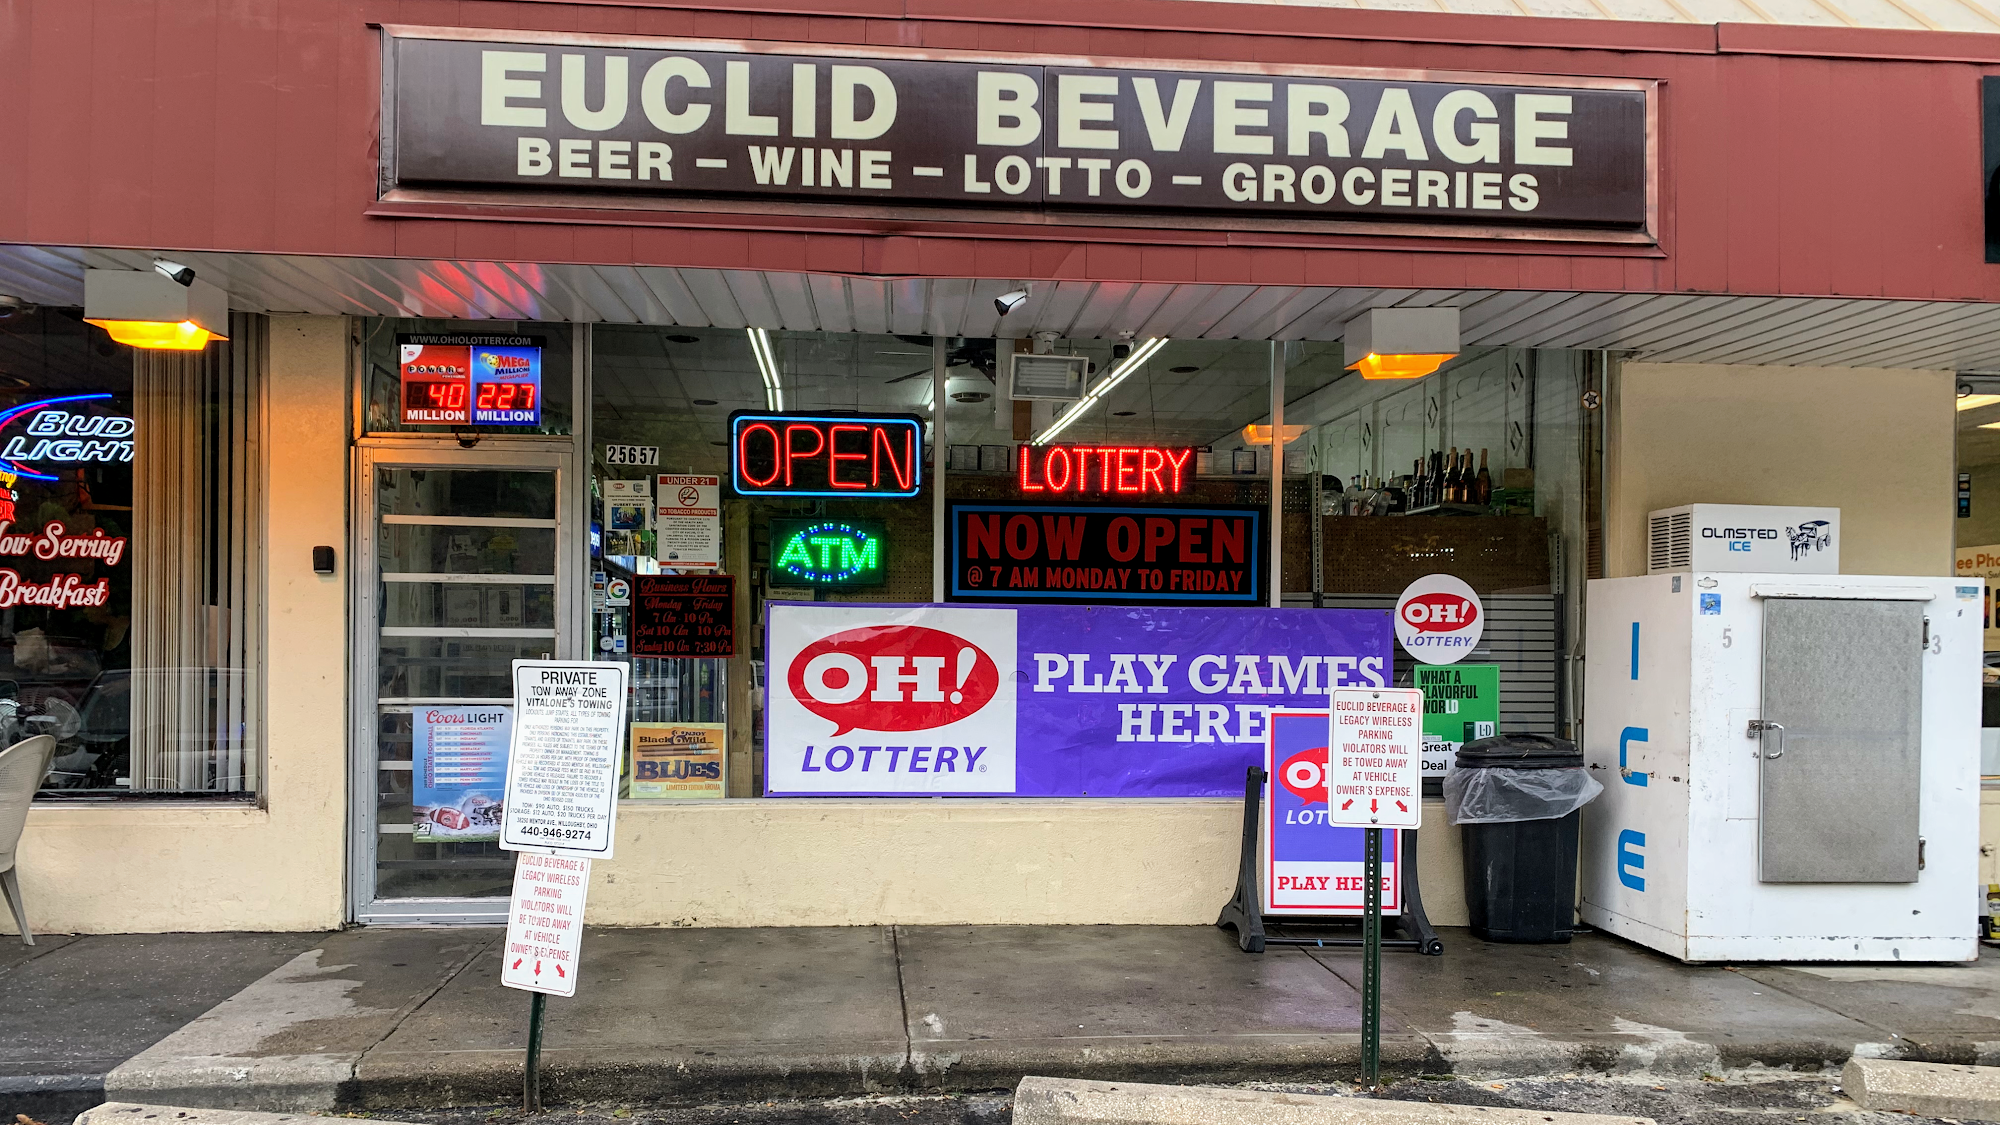 Euclid Beverage & Grocery